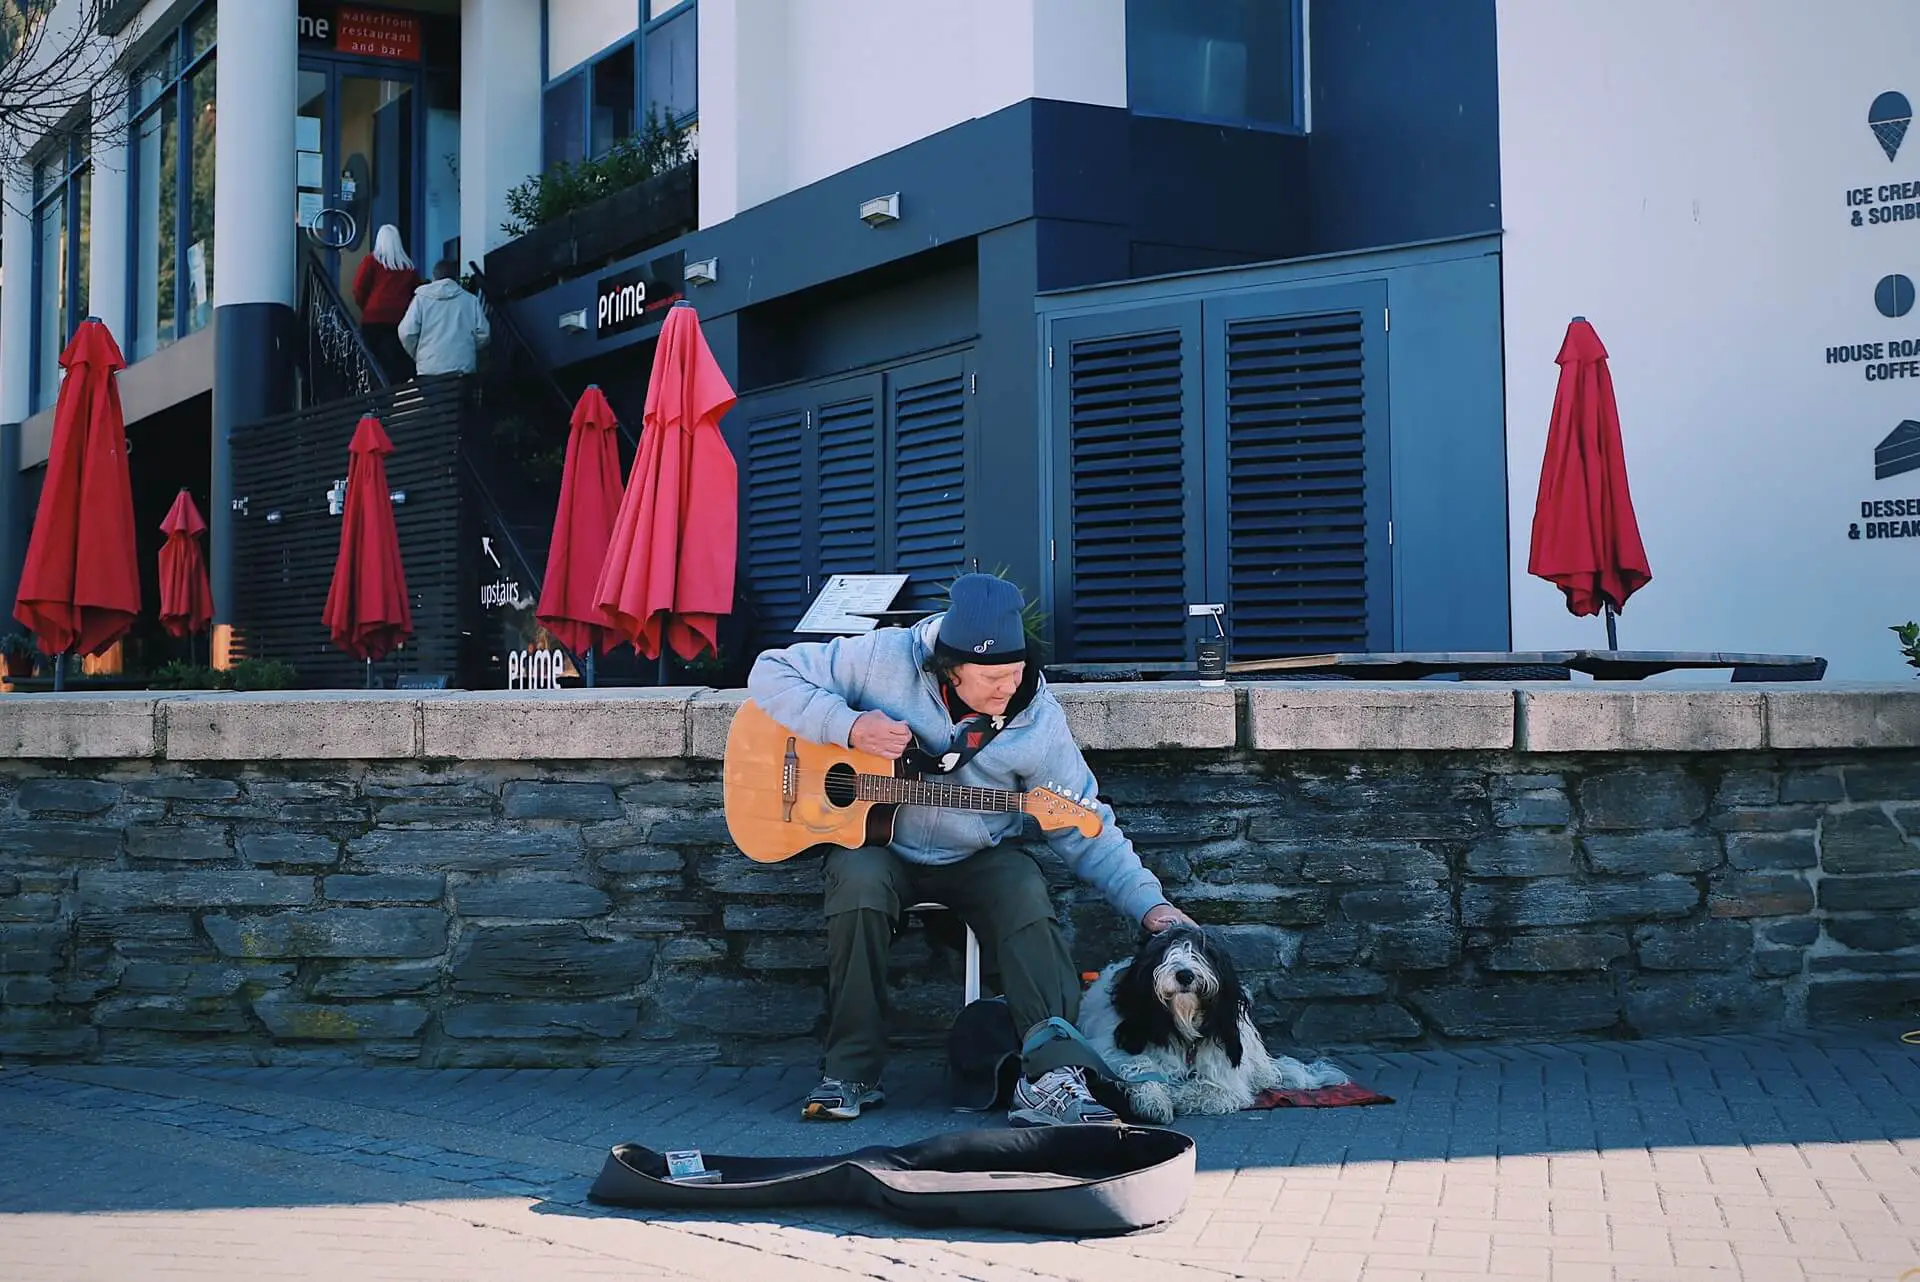 A man working as a travelling busker with his dog